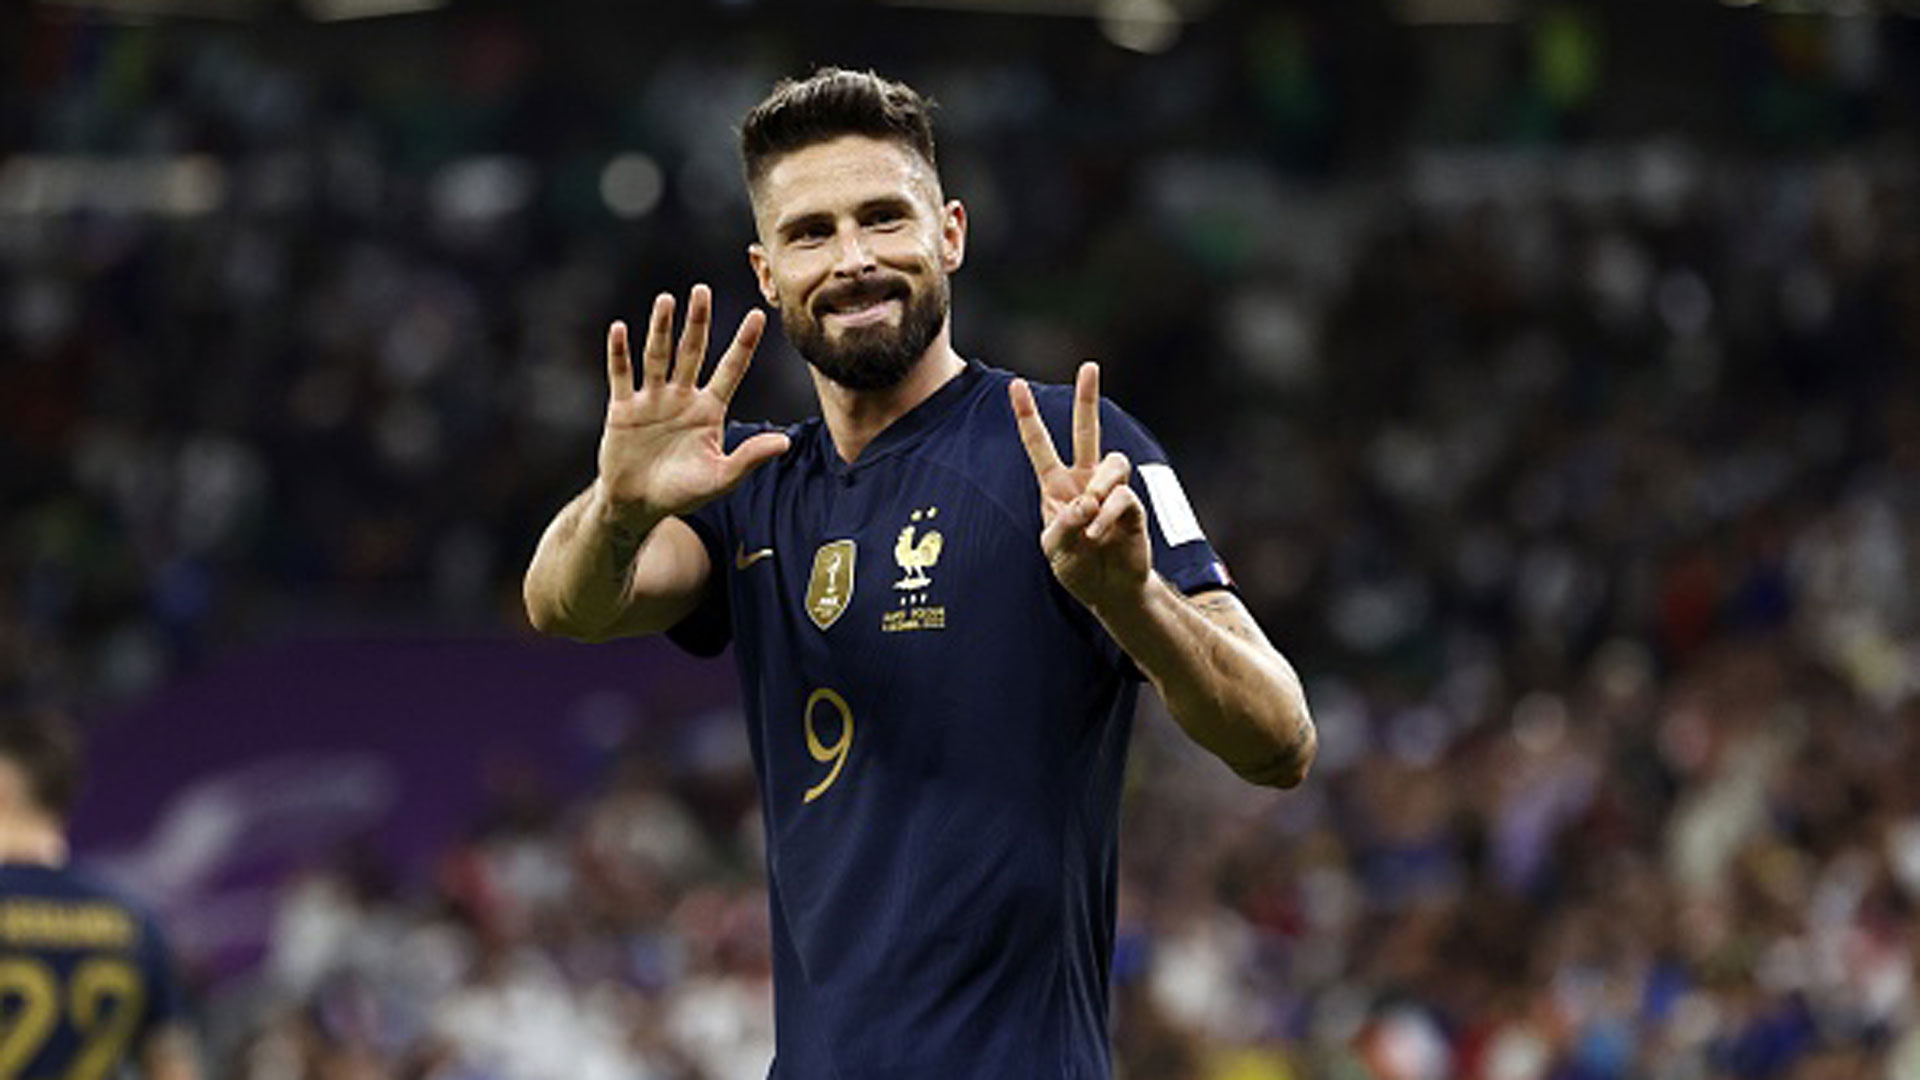 Must See: 'Onto the scoresheet, into the record books'; Giroud becomes France's top scorer – TSN